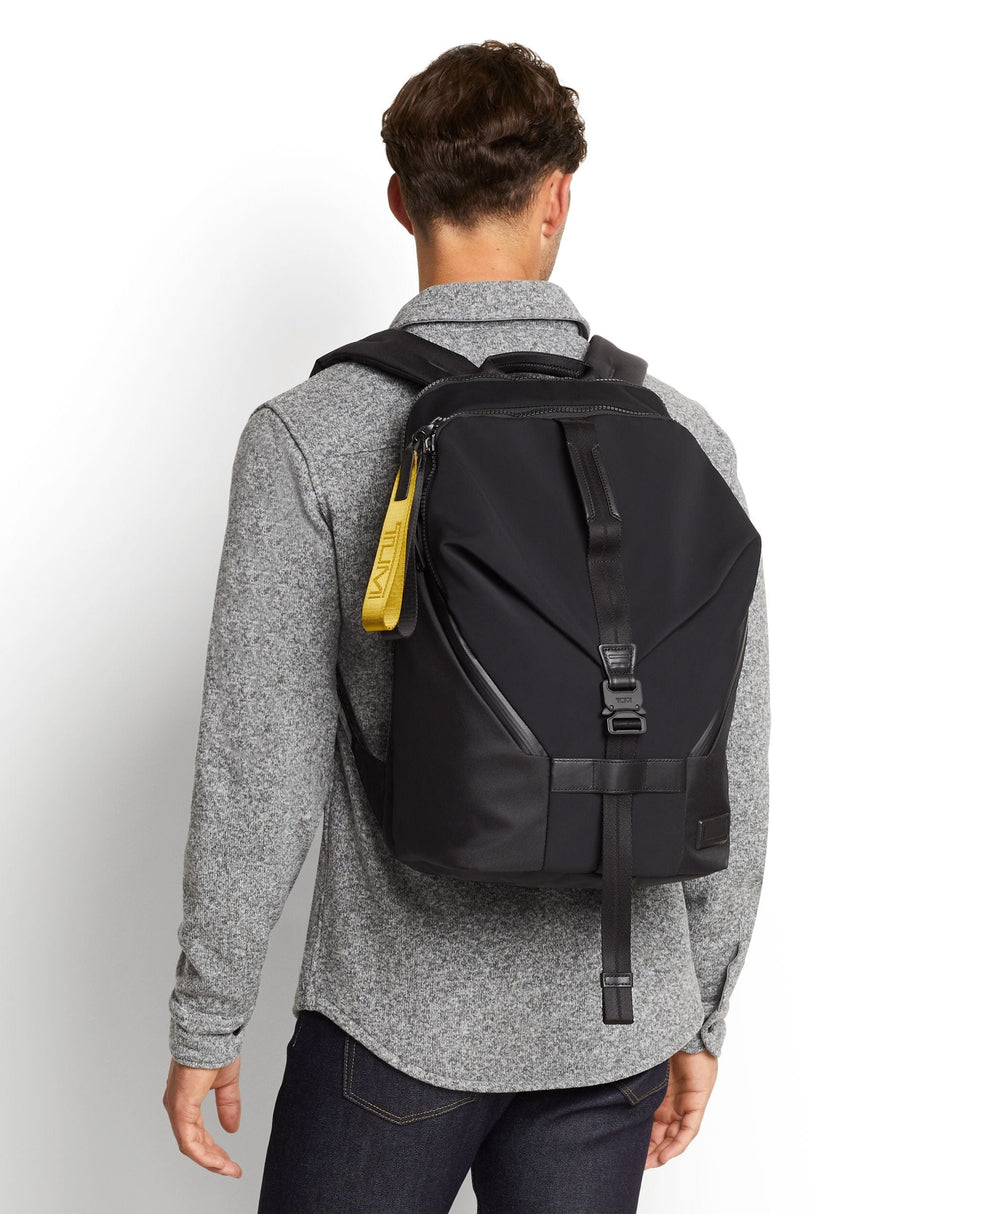 Finch Backpack